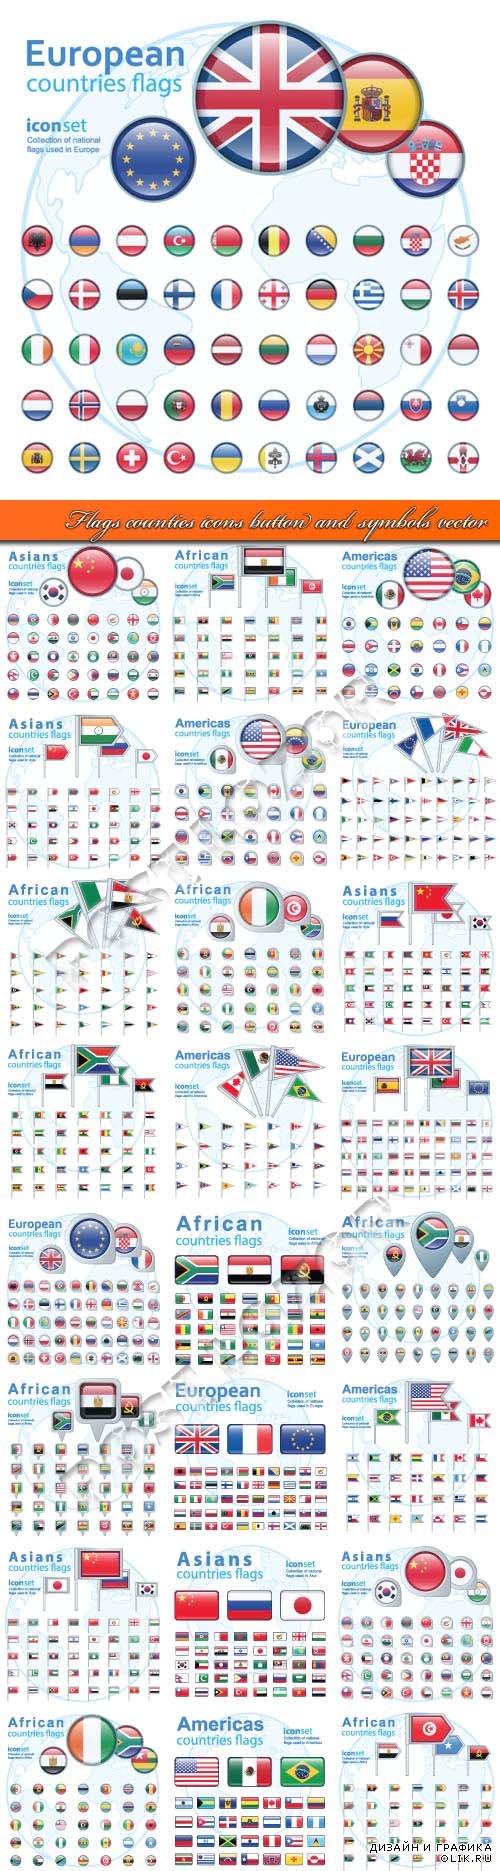 Flags counties icons button and symbols vector